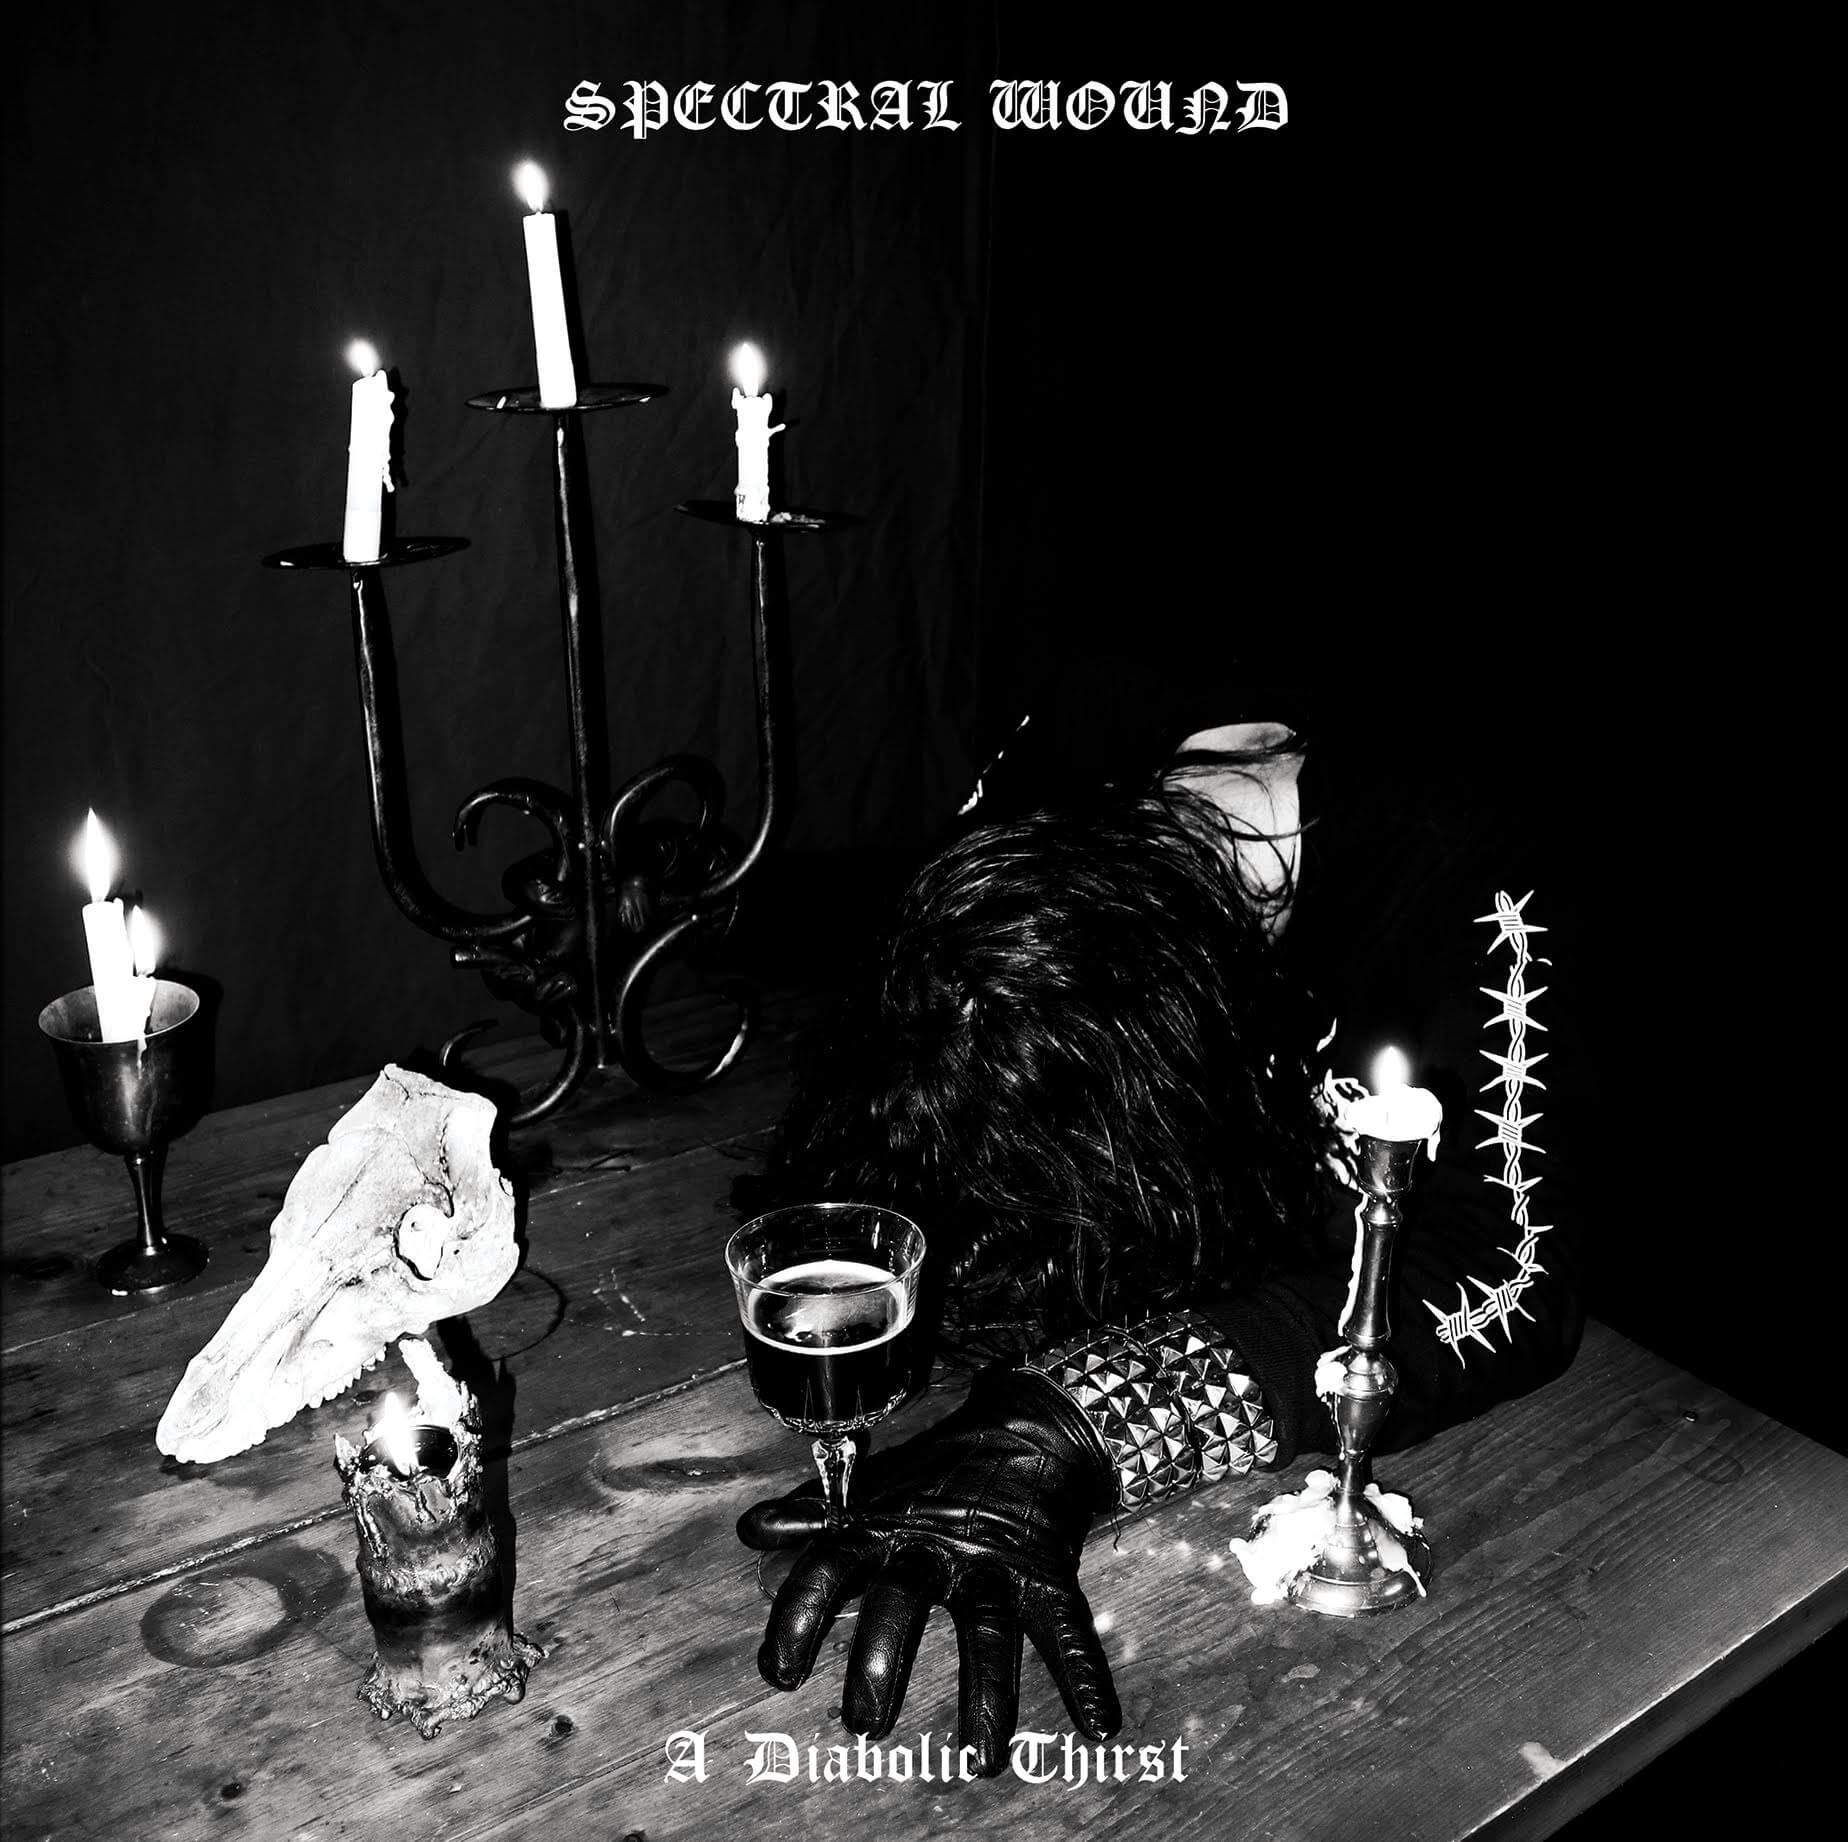 A Diabolic Thirst by Spectral Wound album review by Jahmeel Russell for Northern Transmissions